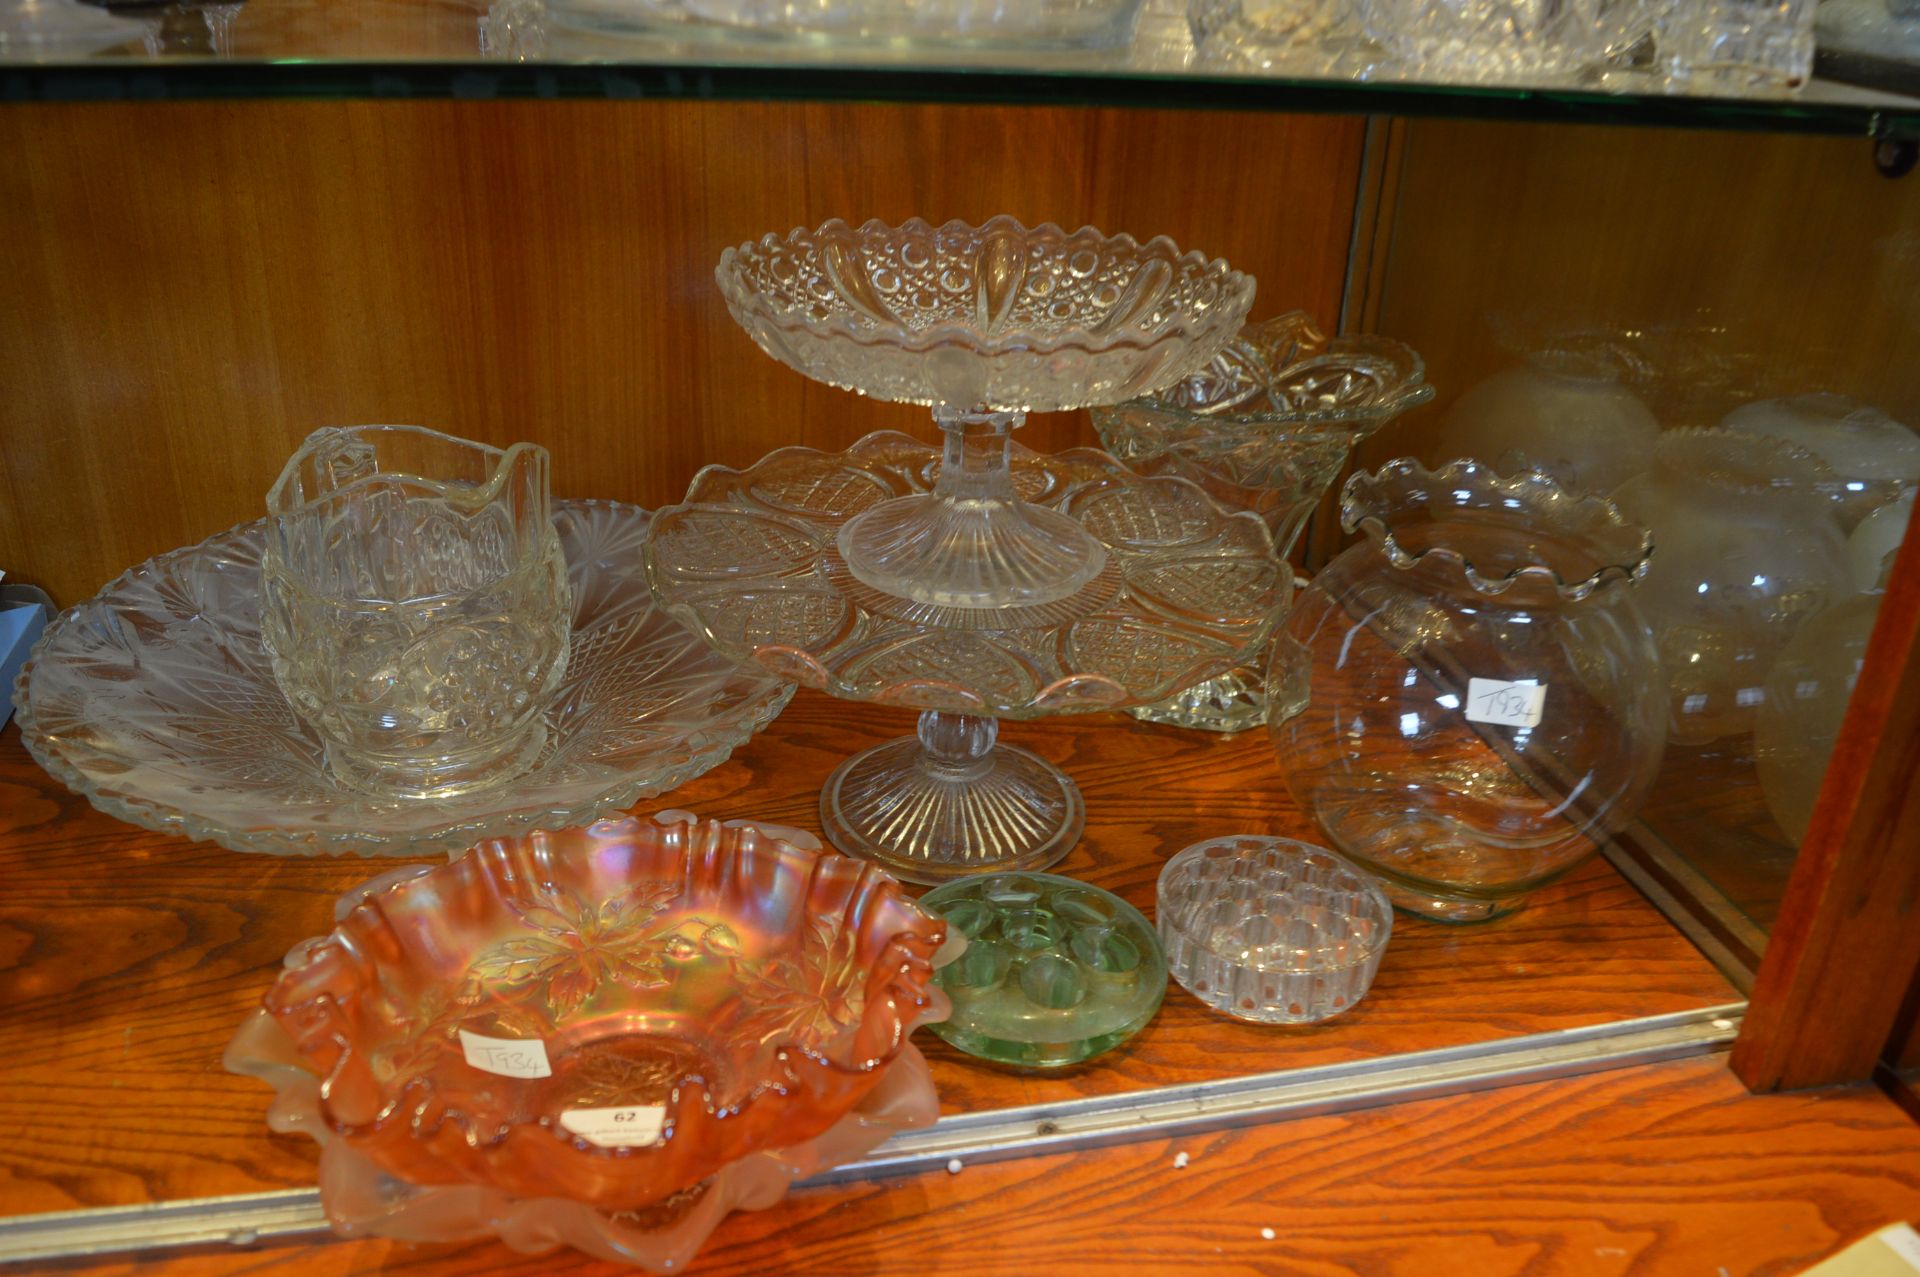 Glass Cake Stands, Bowls, Dishes, etc.